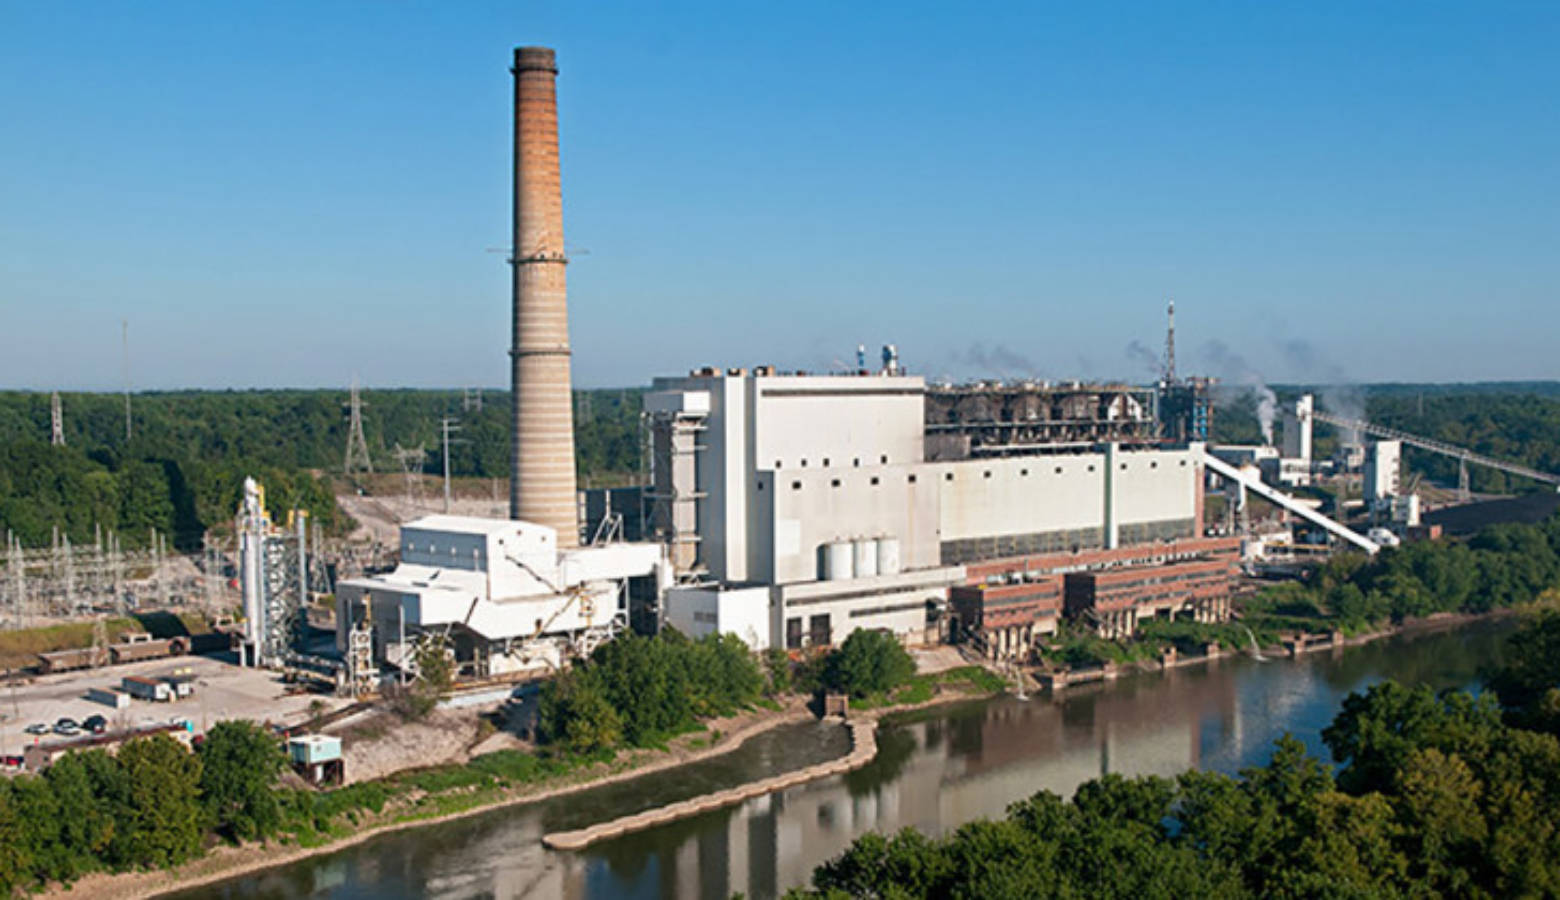 Duke Energy's coal-fired Wabash River plant was officially retired in 2016.